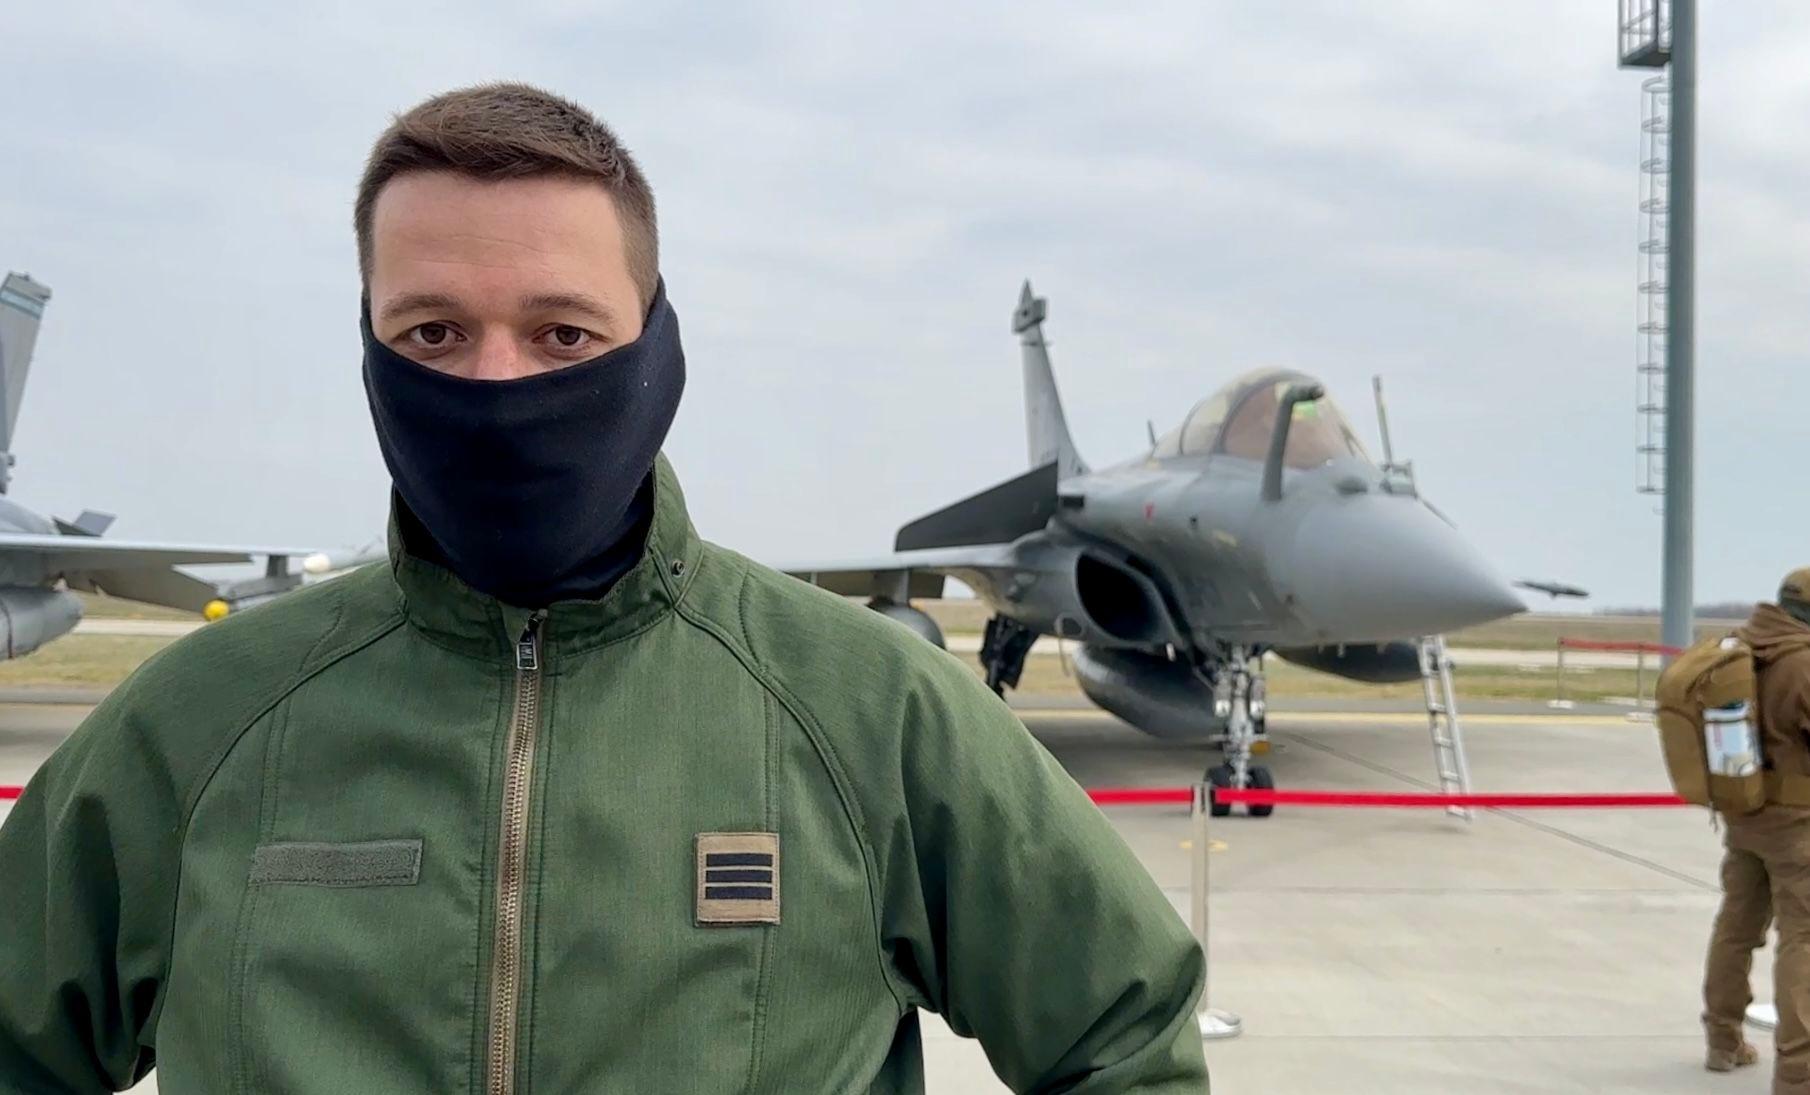 Max, French pilot, one of the two F-16 pilots who took part in the NATO exercise in Borcea. Photo: Carolina Drüten